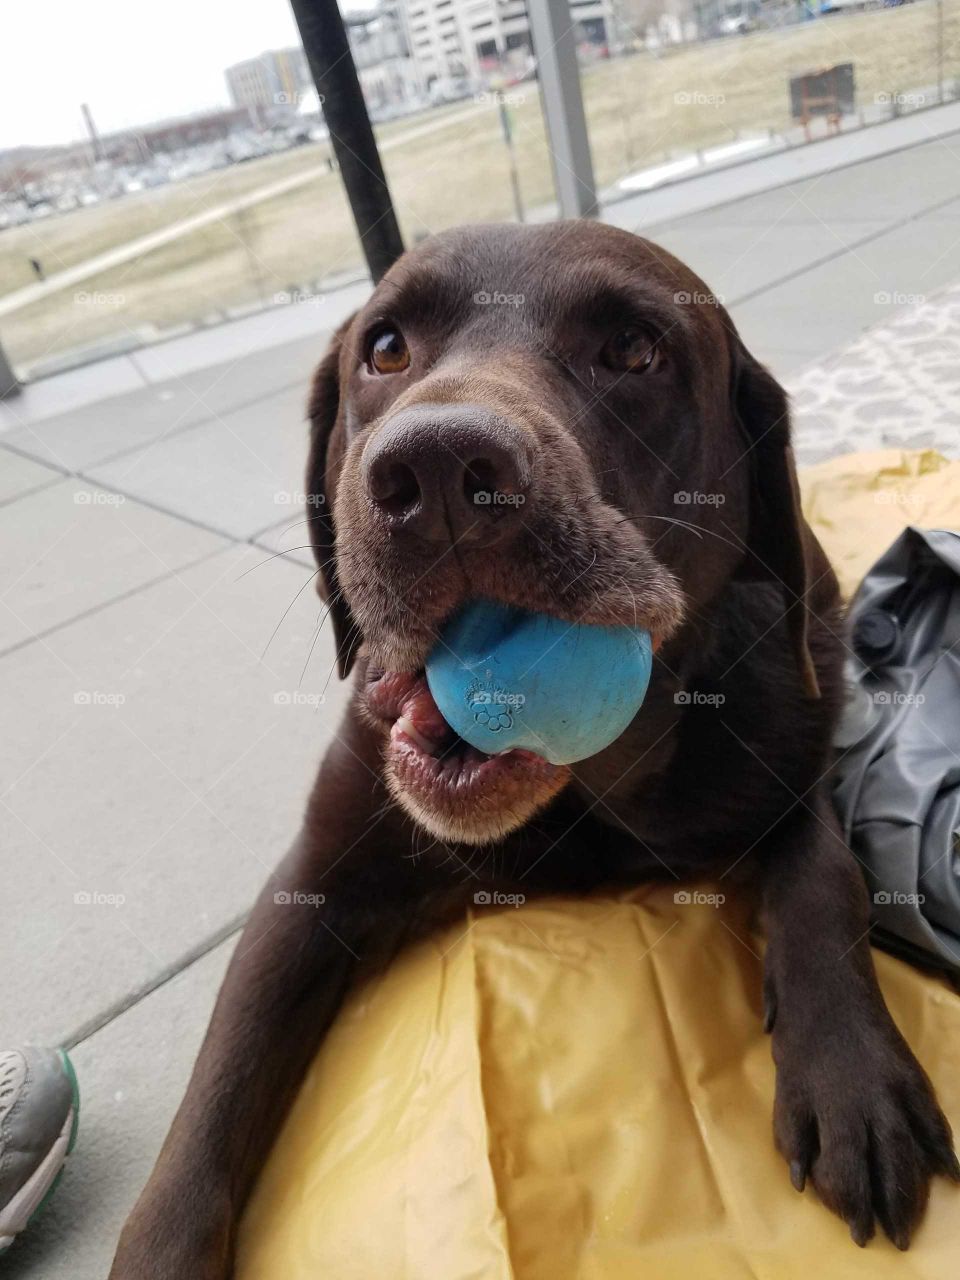 A happy dog with his favorite ball, ready to play. Photo taken March 2018.